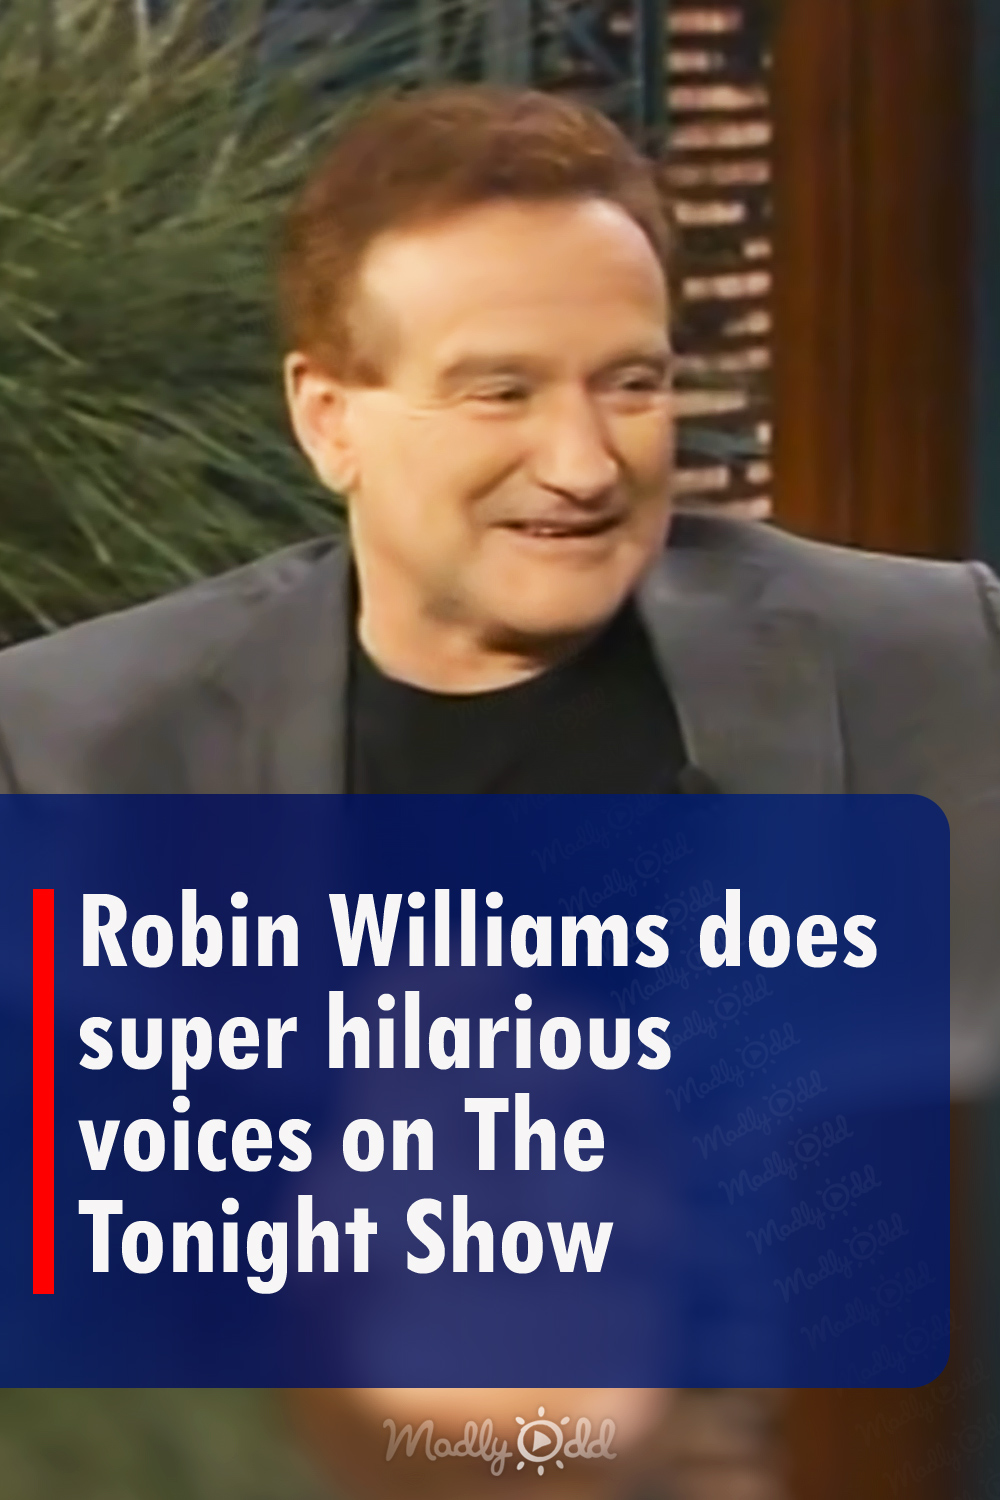 Robin Williams does super hilarious voices on The Tonight Show